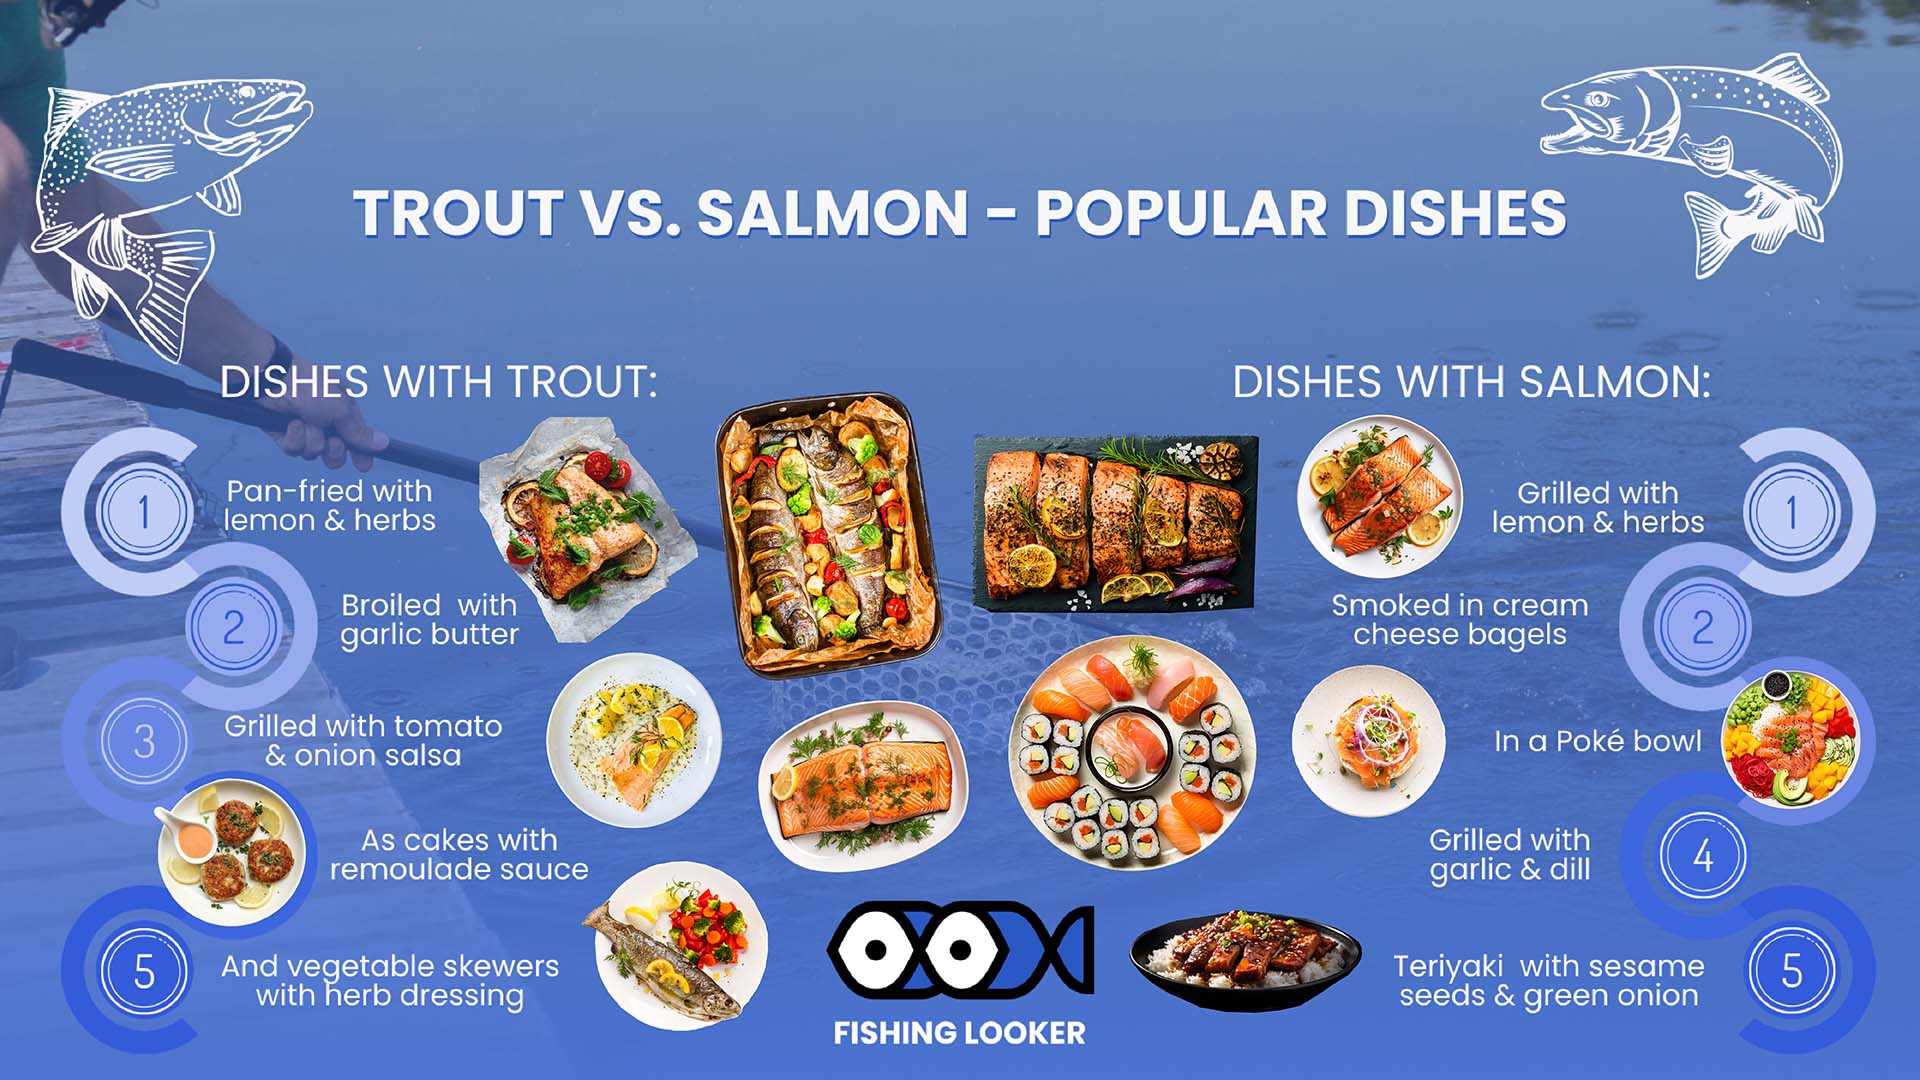 Trout Vs. Salmon - popular dishes infographic 